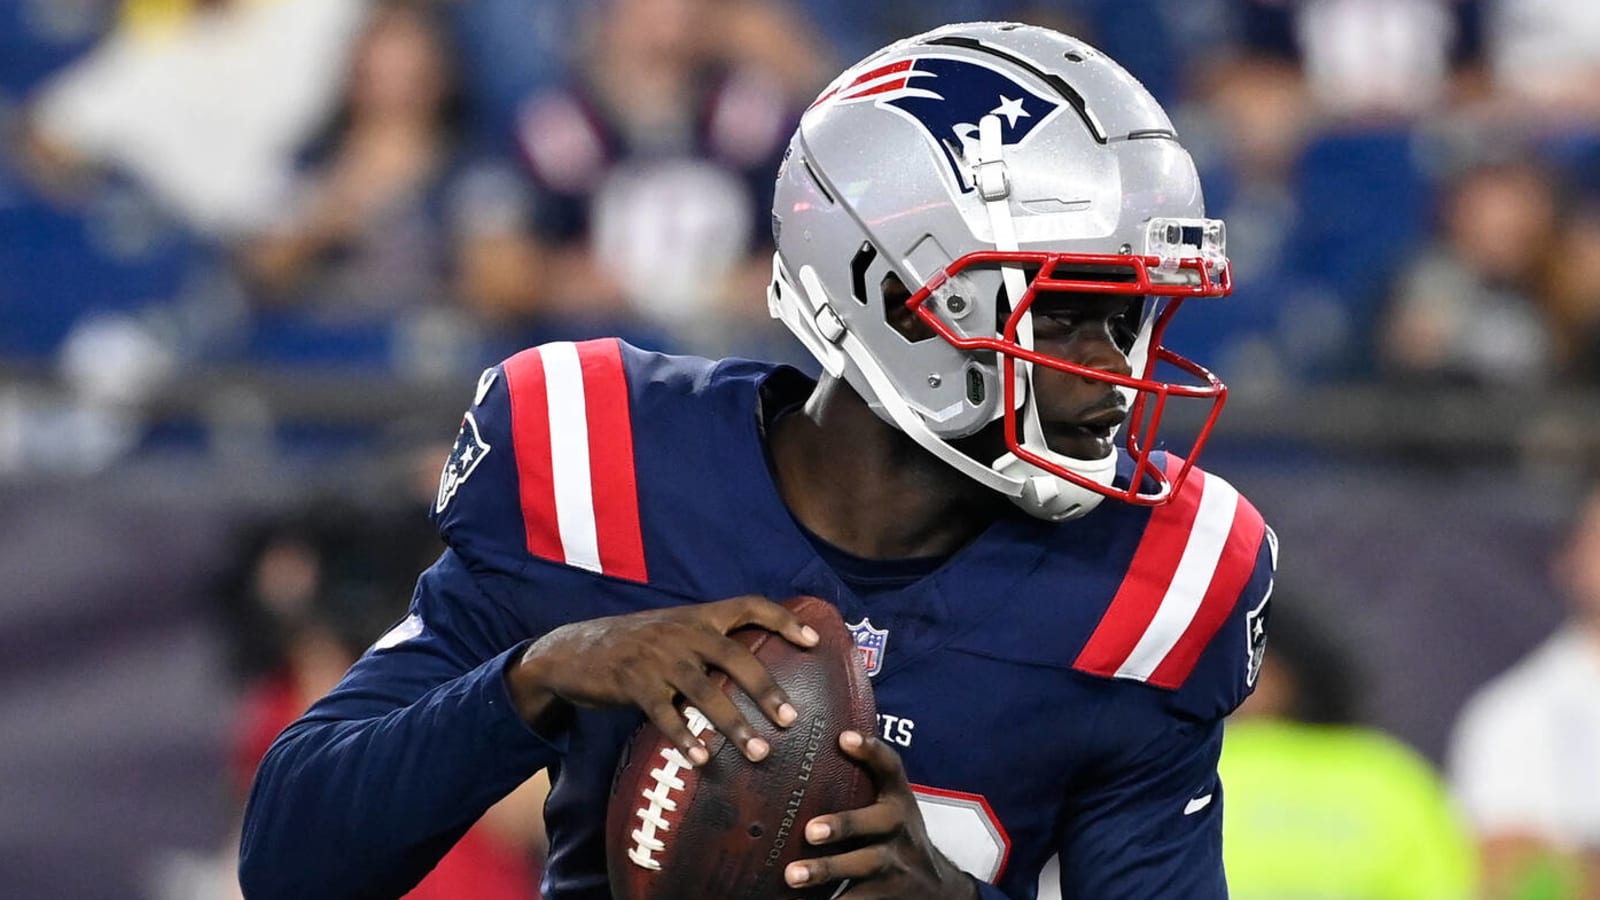 Bill Belichick commends rookie QB's 'poise' and 'toughness'